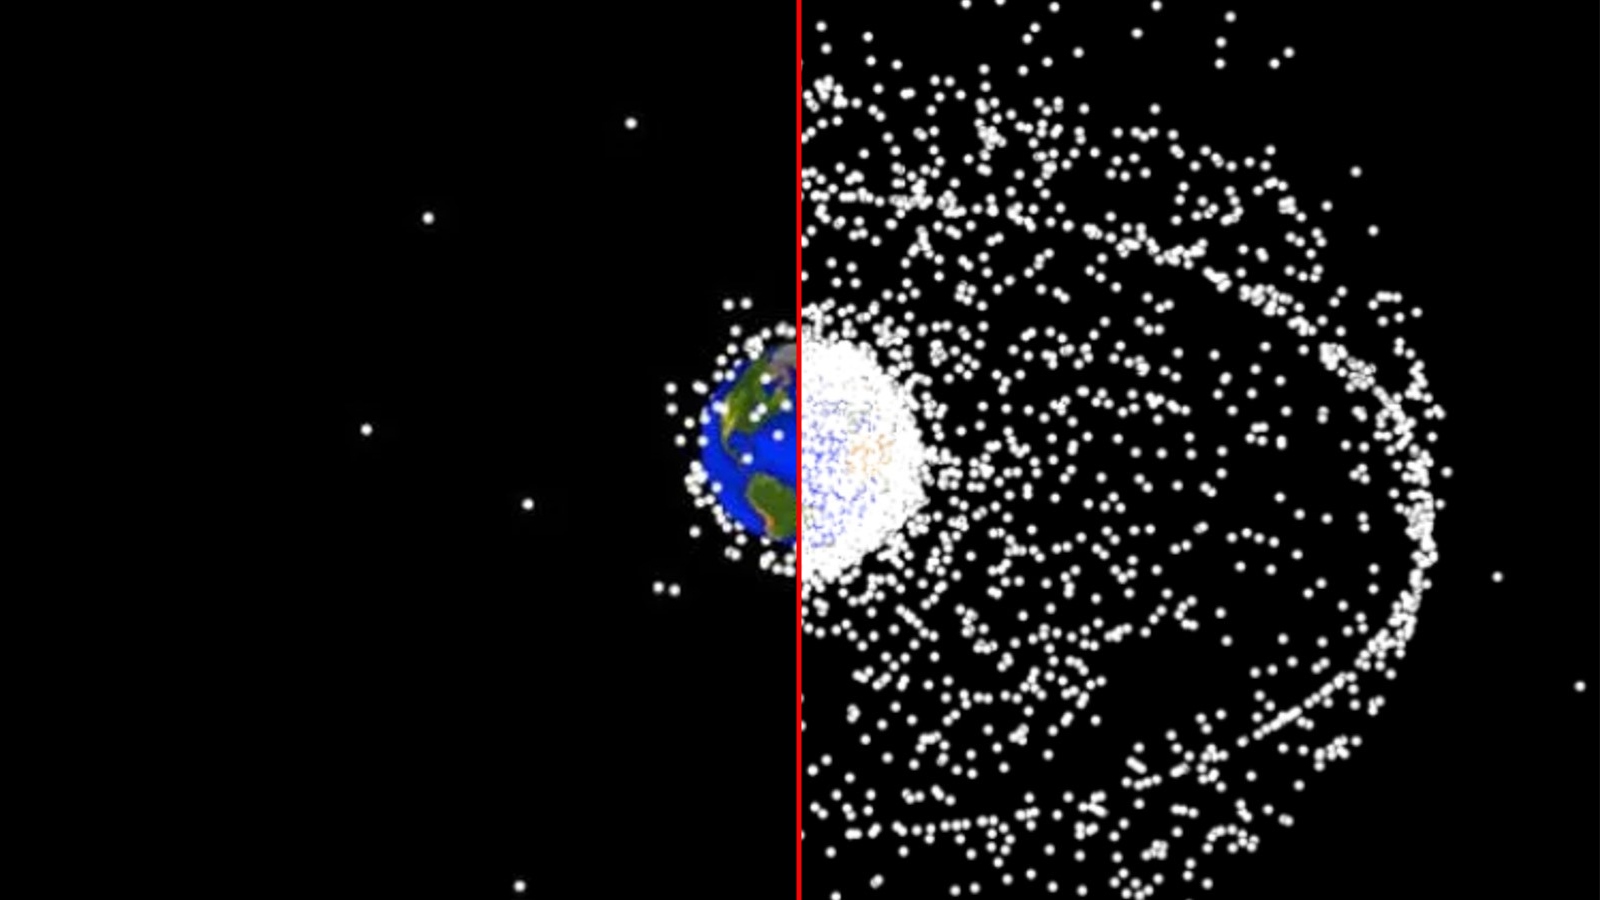 A diagram that shows how the amount of space junk has increased over time